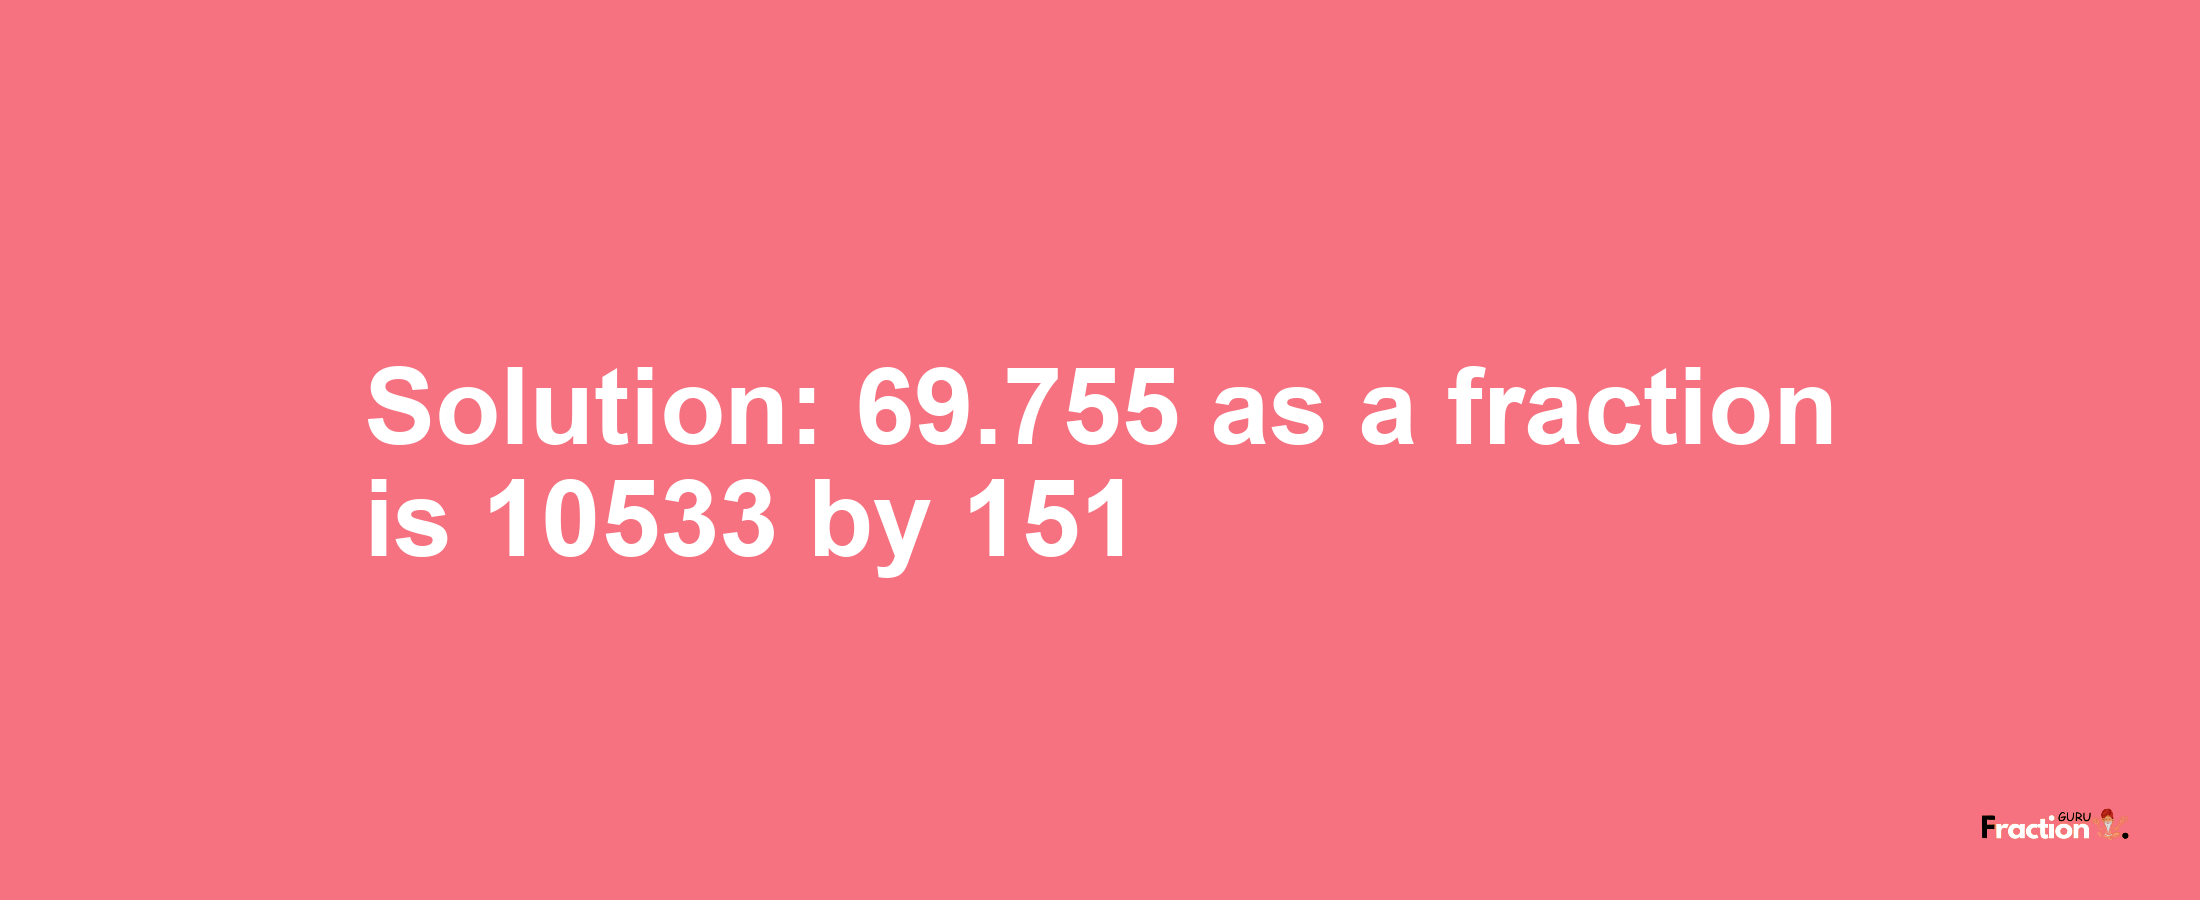 Solution:69.755 as a fraction is 10533/151